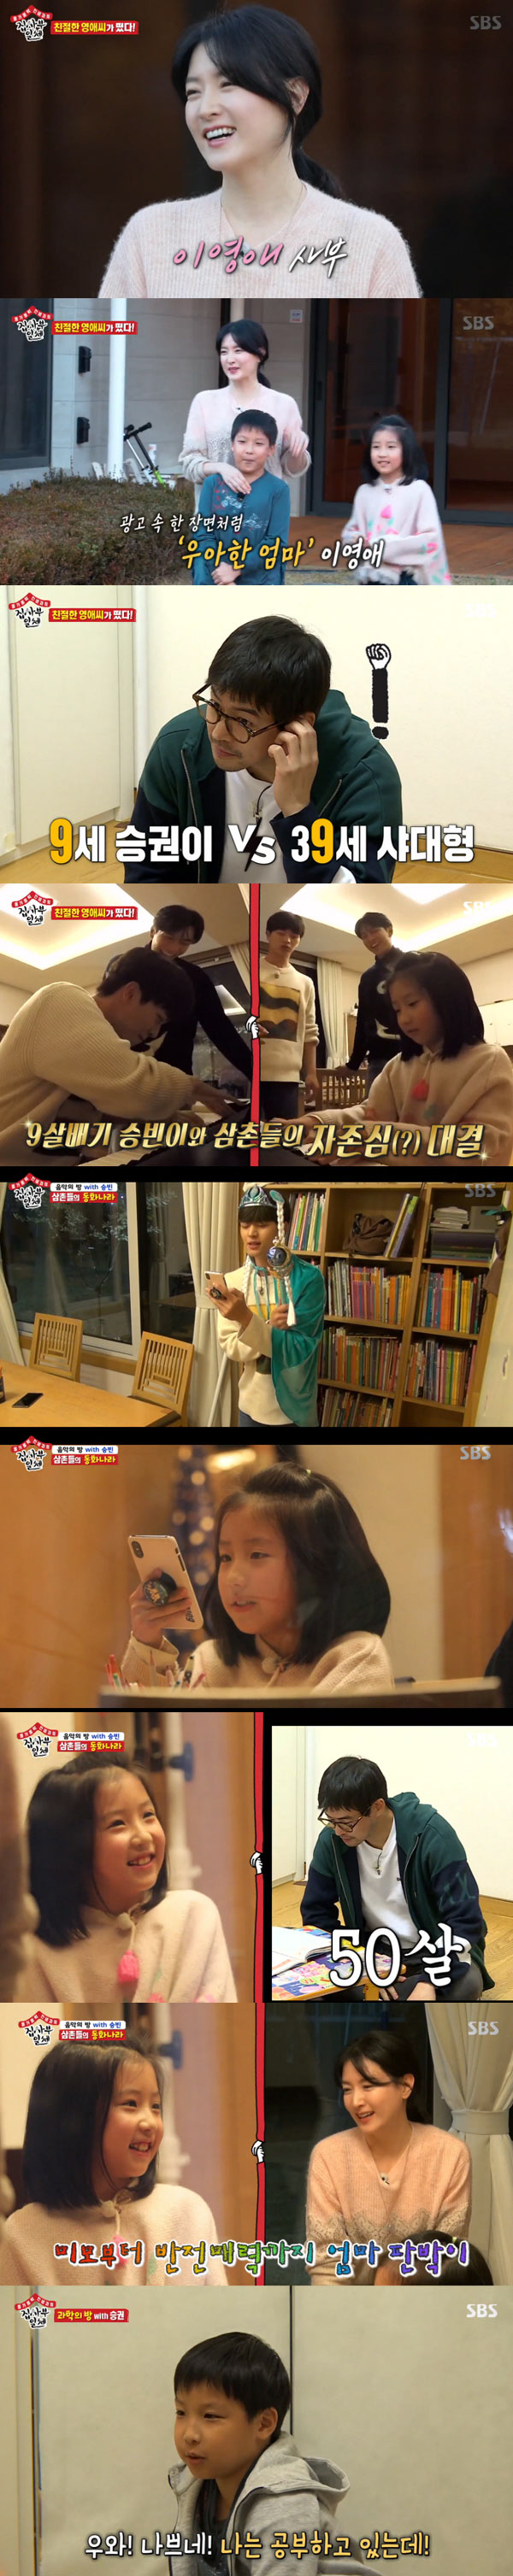 All The Butlers Lee Yeong-ae has revealed her mothers daily life, not an actor.On SBS All The Butlers broadcasted on the 1st, Ascension Hyungjae members had a good time with Master Lee Yeong-ae.Master Lee Yeong-ae, members who had a good time with her I-DLE. By evening, the master prepared a handmade meal with ingredients from the garden for the members.The members who tasted the traditional Korean traditional dish made of cabbage and oyster cabbage soup showed a stormy food by pouring exclamation to the masters cooking skills, It is really so delicious and What is this?At this time Lee Seung-gi asked, Dae Jang Geum TV viewer ratings came out 50%? And Lee Yeong-ae laughed.When we said Dae Jang Geum TV viewer ratings were over 80% in a Middle East country, Lee Yeong-ae said, its nearly 90%.Lee Yeong-ae said, When I walked with the groom and Itaewon, there were some people who gave flowers to Middle East.Mom Lee Yeong-aes day of work has also been revealed.Lee Yeong-ae said, I go to school in the morning and follow a lot of childrens schedules. I get married late and know more about the importance of my family.Im trying to be with I-DLE as much as I can, he said.Lee Seung-gi said, When I saw it, I thought, I would be happy if I had a family. Lee Yeong-ae said, It is a great strength.In particular, Lee Yeong-ae said, There was no fear of marriage. There was a worry about the fans disappearing in their 20s and 30s.The more I think, Lets make roots that do not shake even if I come back. I thought about it and ran hard in my 20s and 30s. In addition, after taking a TV commercial during his rookie days, he shared the truthful story of the master who had not done anywhere in the past, such as the old anecdote that had to work part-time chocolate sales.Later teatime time: Master Lee Yeong-ae and members talked about the importance of praise; Lee Yeong-ae practices expression.I love you, thank you, and always hug you. I practice it so that you can express it as delicious.Asked about the praise of the best I-DLE, he laughed, It is best when you say the food your mother gives is the best.The members decided to call their acquaintances and have time to praise them.Yang Se-hyeong called Park Na-rae and praised Yang Se-hee, saying, Its so cool to come to Park Na-rae now. Park Na-rae praised Yang Se-hyeong, saying, Why are you so grateful?SNS writing is also impressed and sometimes empowered, said Yook Sungjae, who said, There are many cases of opposition.Lee Yeong-ae said, It seems important because friends who make their debut early are very weak to judge themselves, so they are wielded by horses, worry about themselves, and see that there are many bad things, so they can save and kill people.Lee Seung-gi said, It seems like these days when good words, praise words are really desperate.Meanwhile, members who left for New Zealand at the end of the broadcast were also revealed.Prior to leaving the station, the members gathered at the station received an invitation from the master, where it read: Only those who challenged and enlightened in nature deserve to be invited to my dream land.At this time, the production team said, The master will visit you directly at the moment of unity with nature.After that, the members played a game of pocket money, singing and proceeding to 100 bills. The first place will be Choices with the number presented by the master.As a result, Lee Seung-gi scored first, and he Choices the numbers 100 and Yang Se-hyeong.Since then, the members have raised expectations for New Zealand in anticipation.